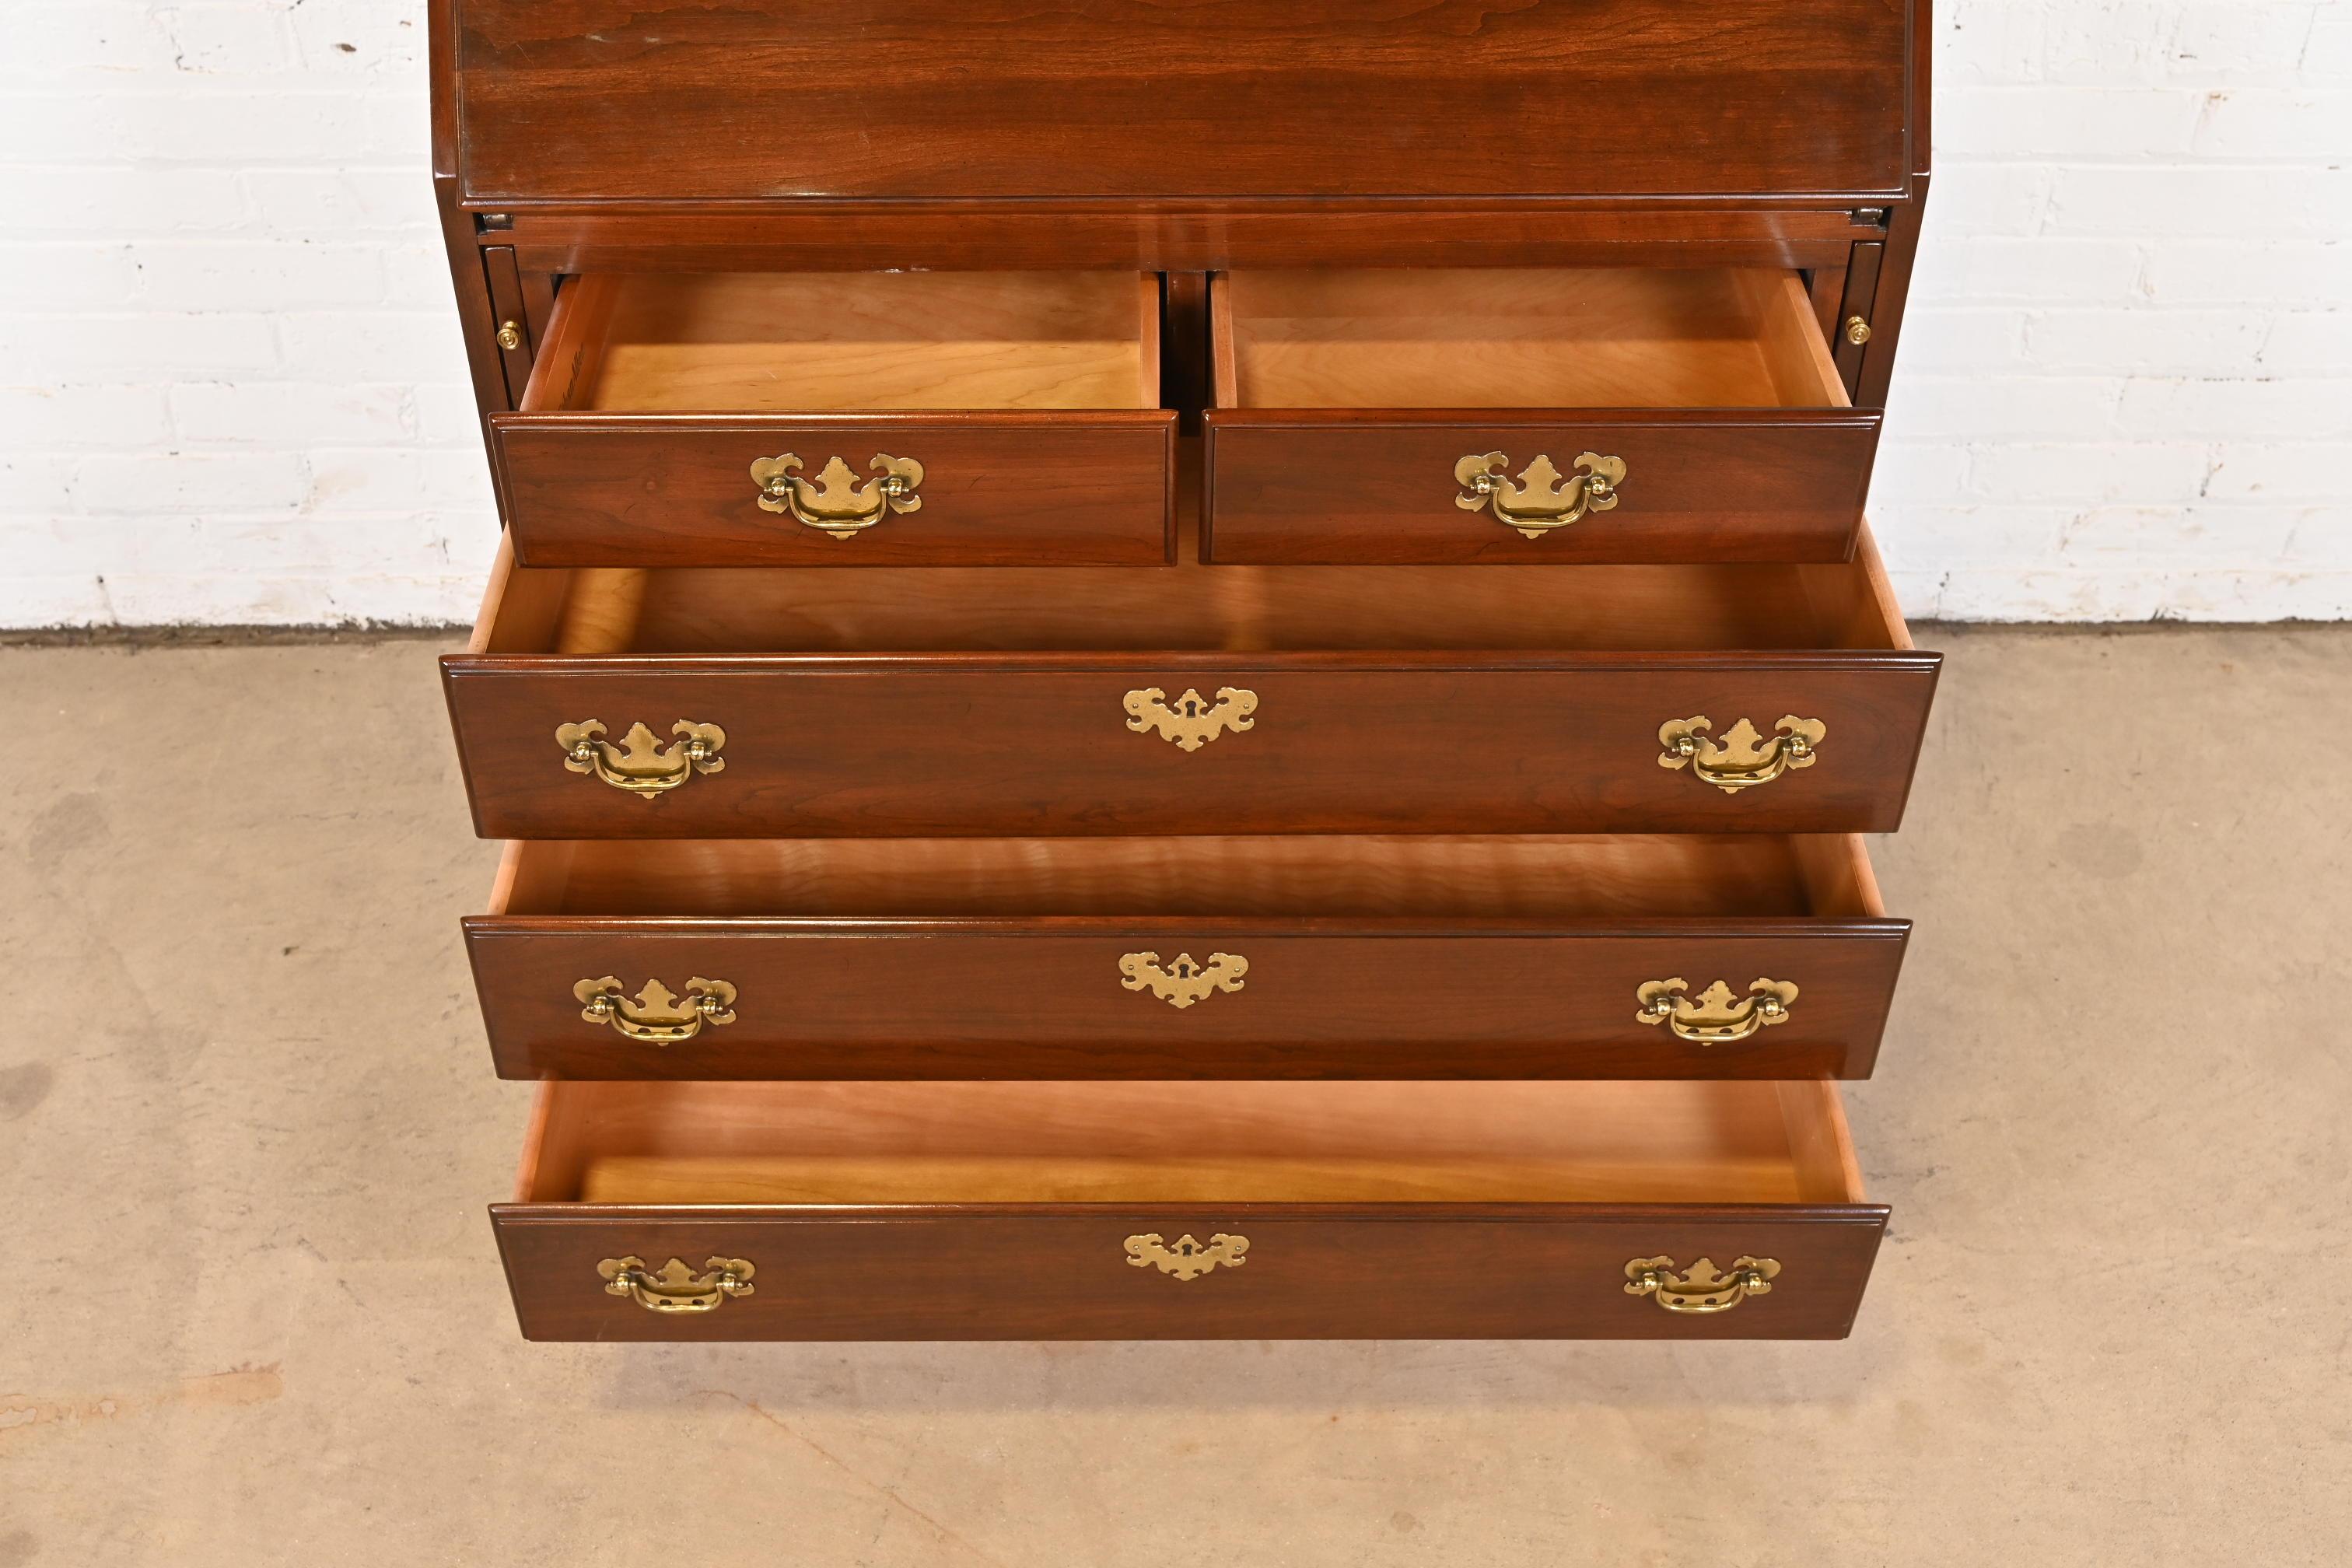 Brass Georgian Cherry Wood Drop Front Secretary Desk With Bookcase Hutch For Sale